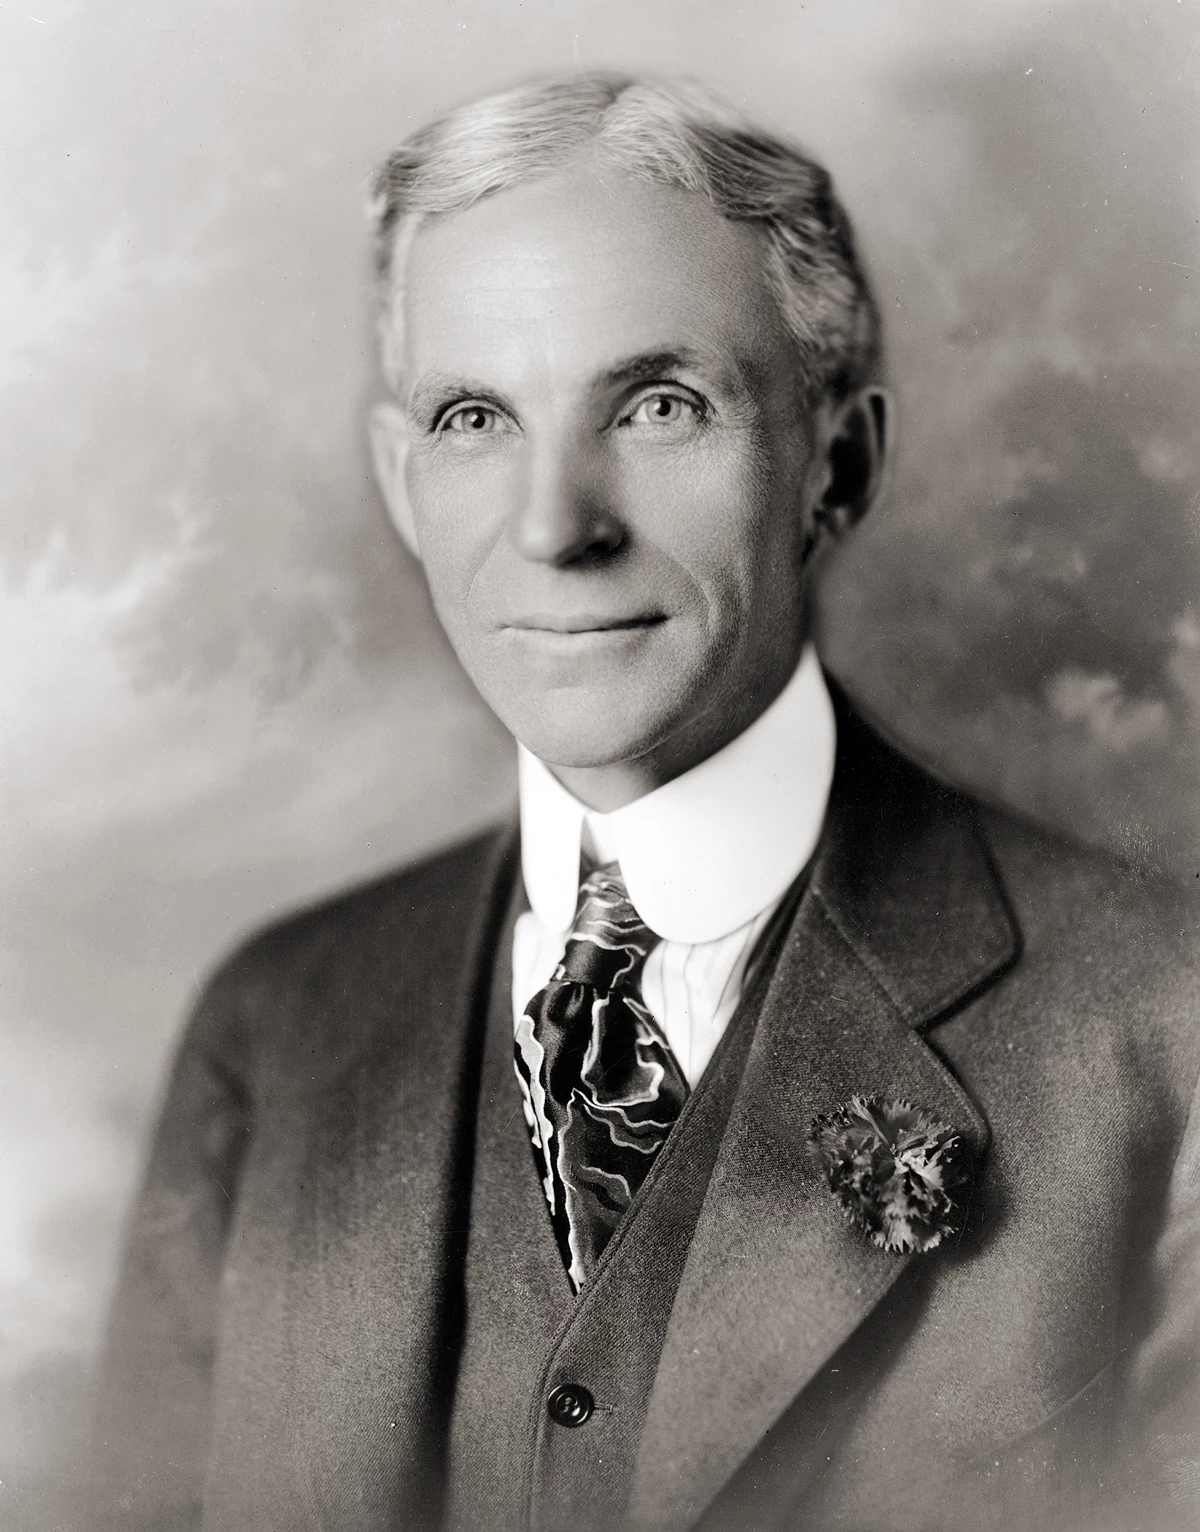 A black and white photograph of Henry Ford